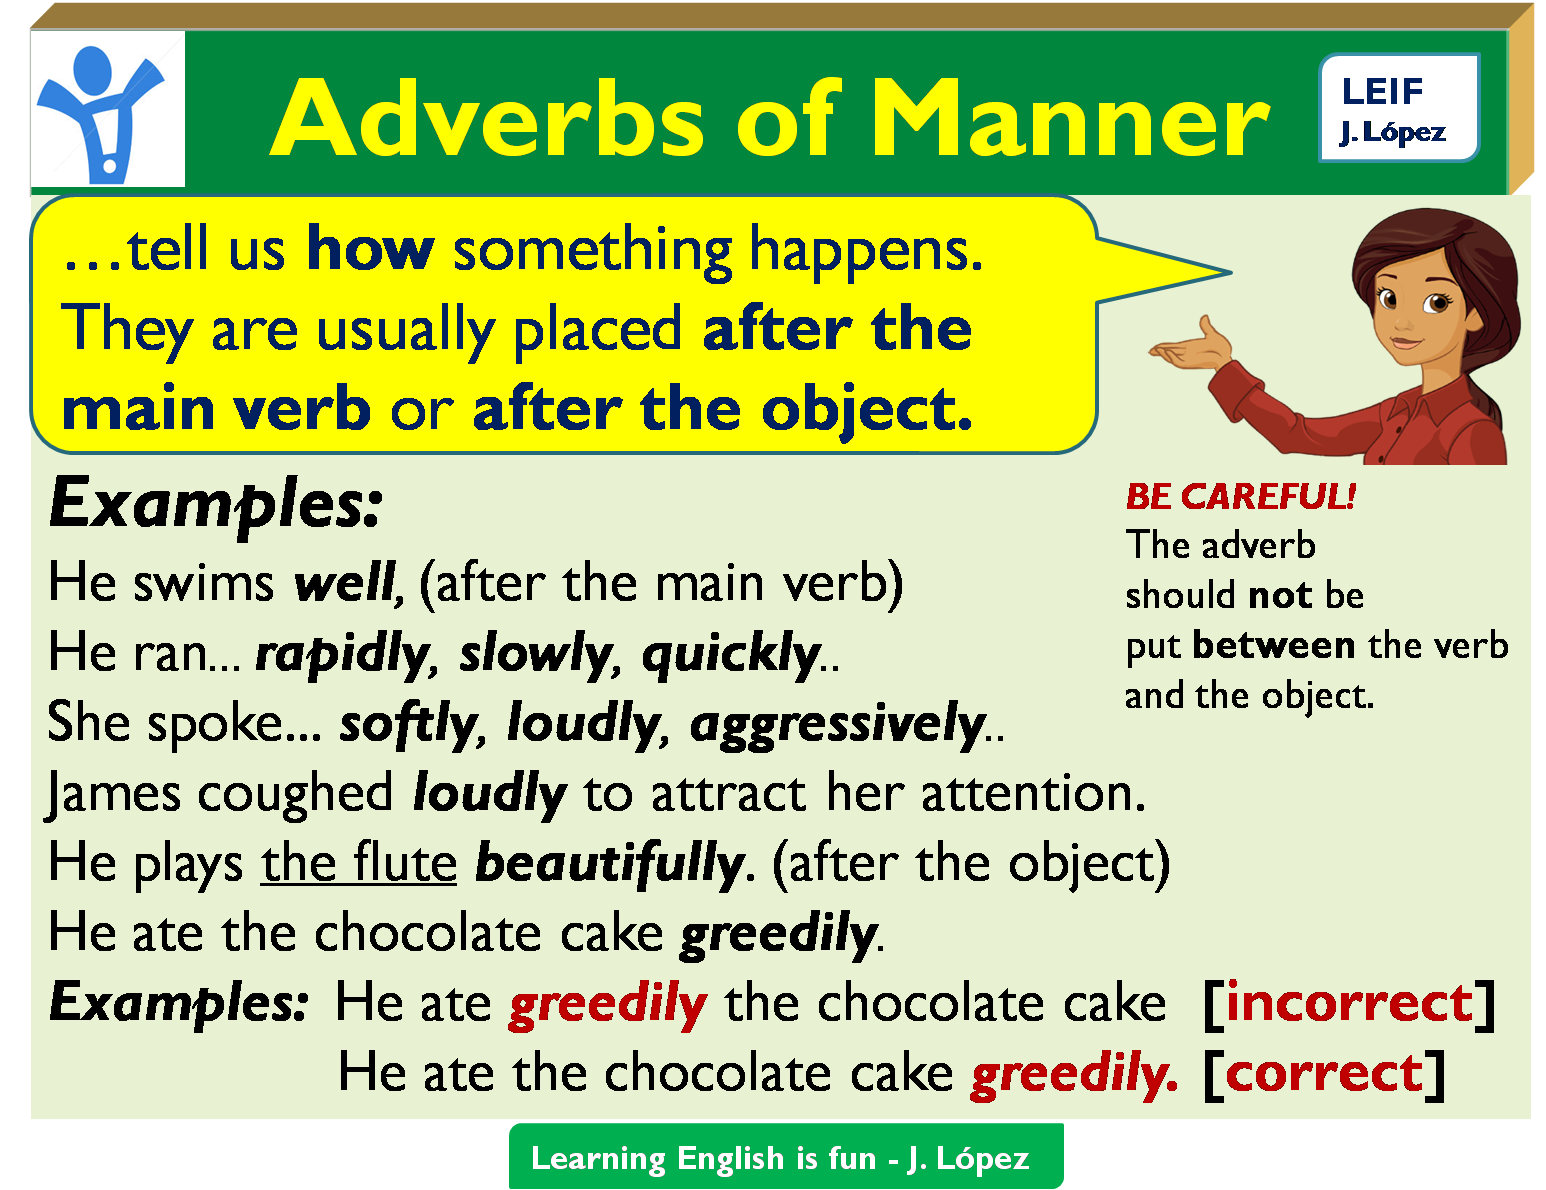 Adverbs of manner. Adverbs of manner правило. Adjectives adverbs of manner. Adverbs of manner таблица. Adverbs slowly